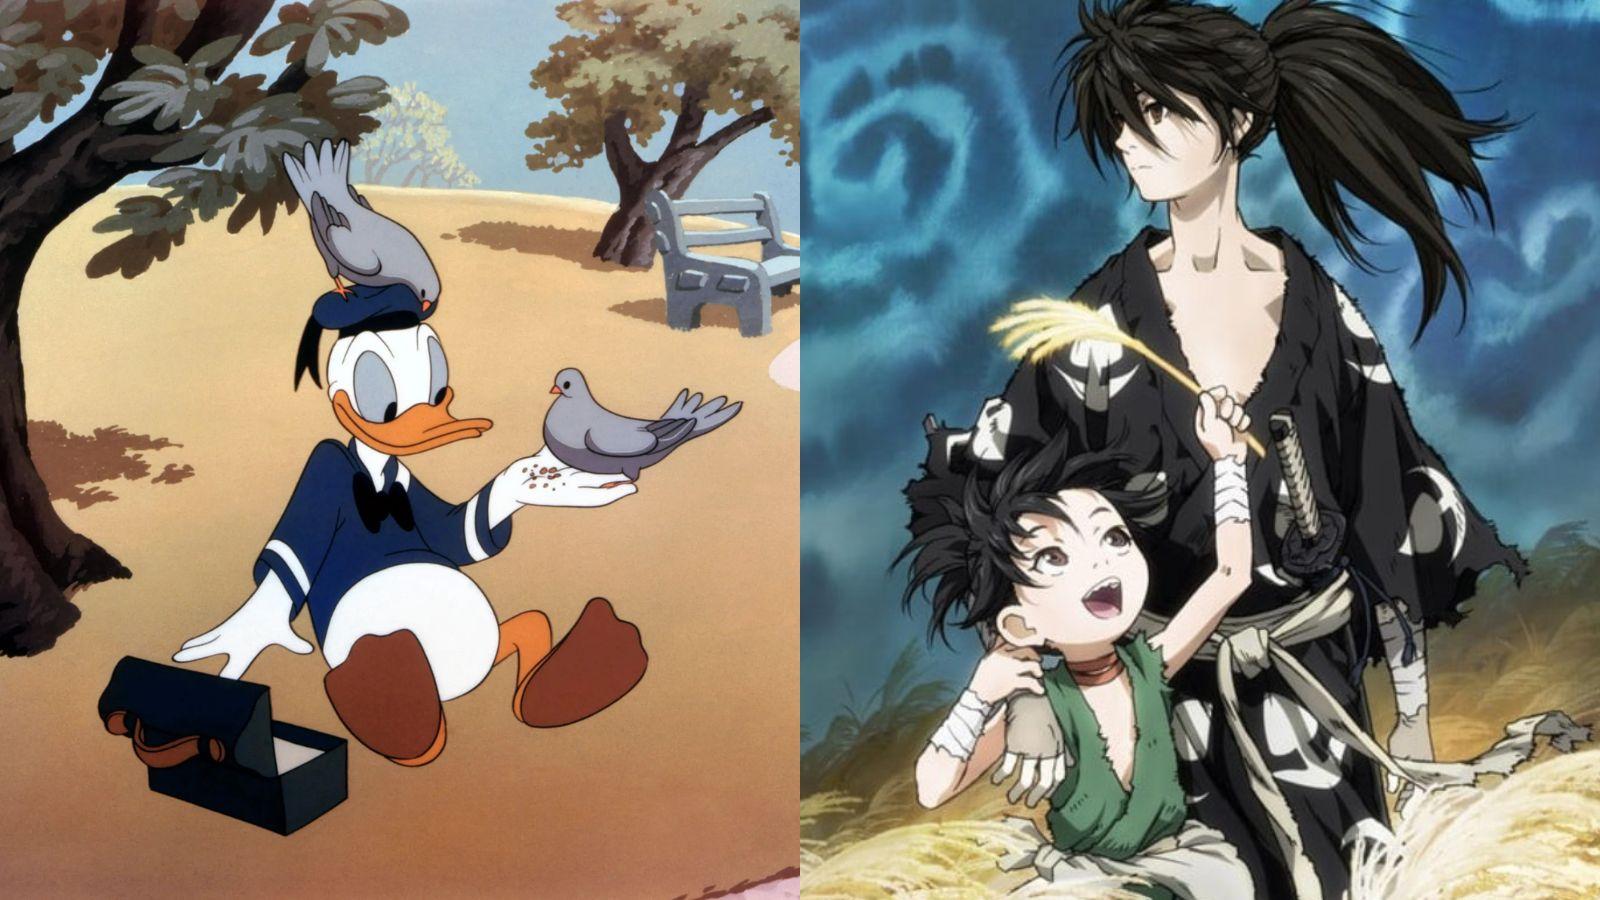 An image of Disney and anime characters